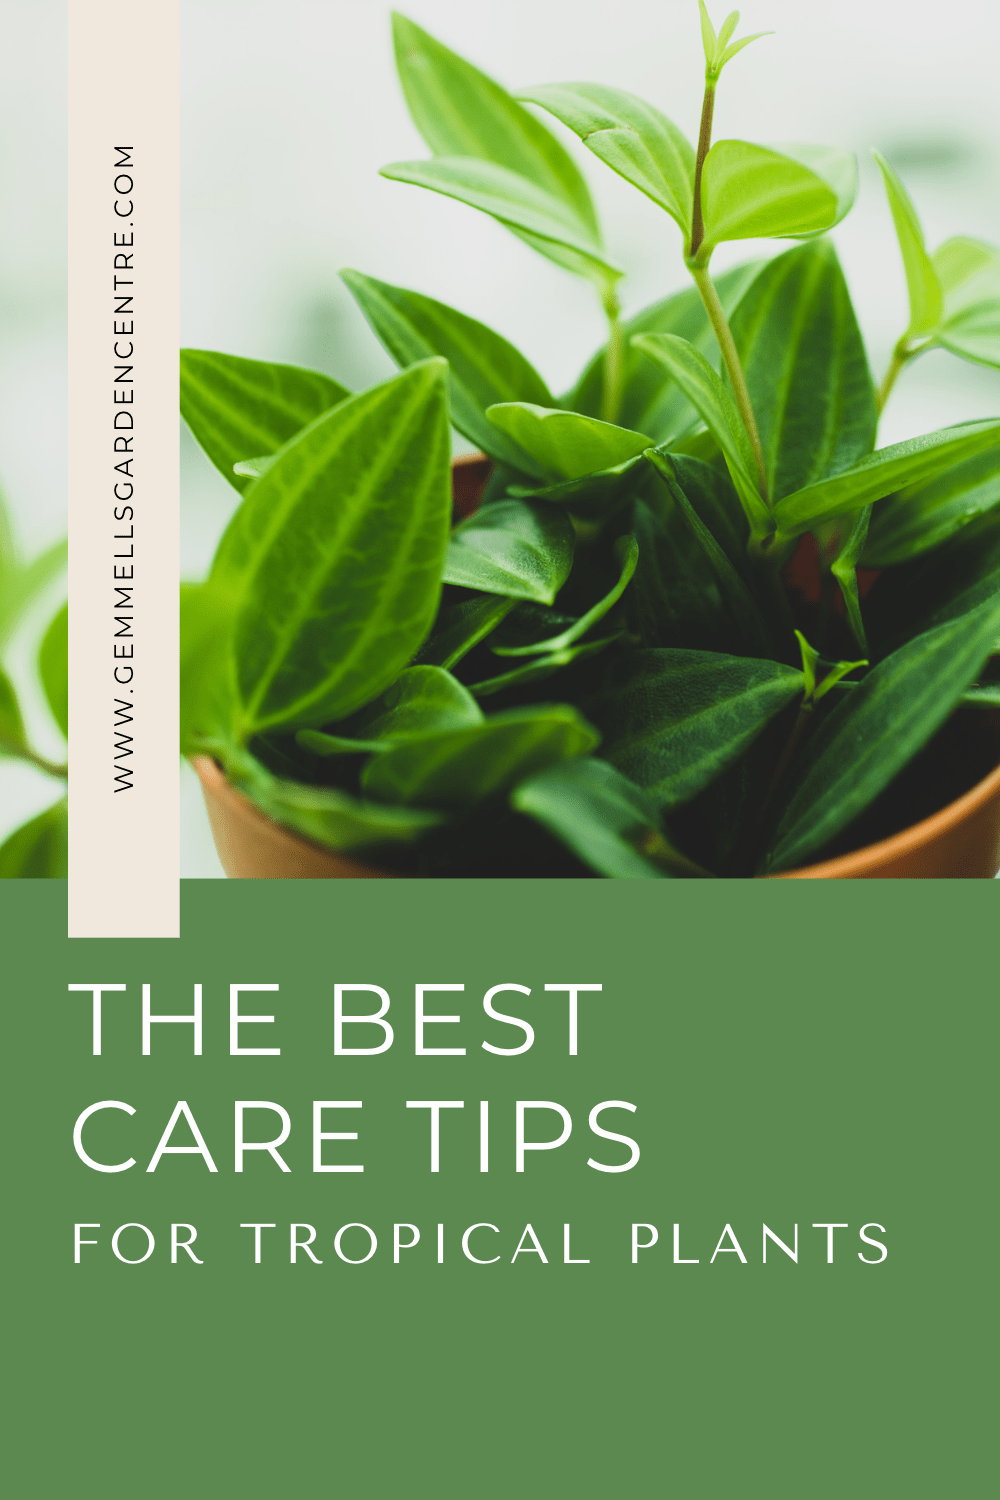 How to Care for Tropical Foliage Plants